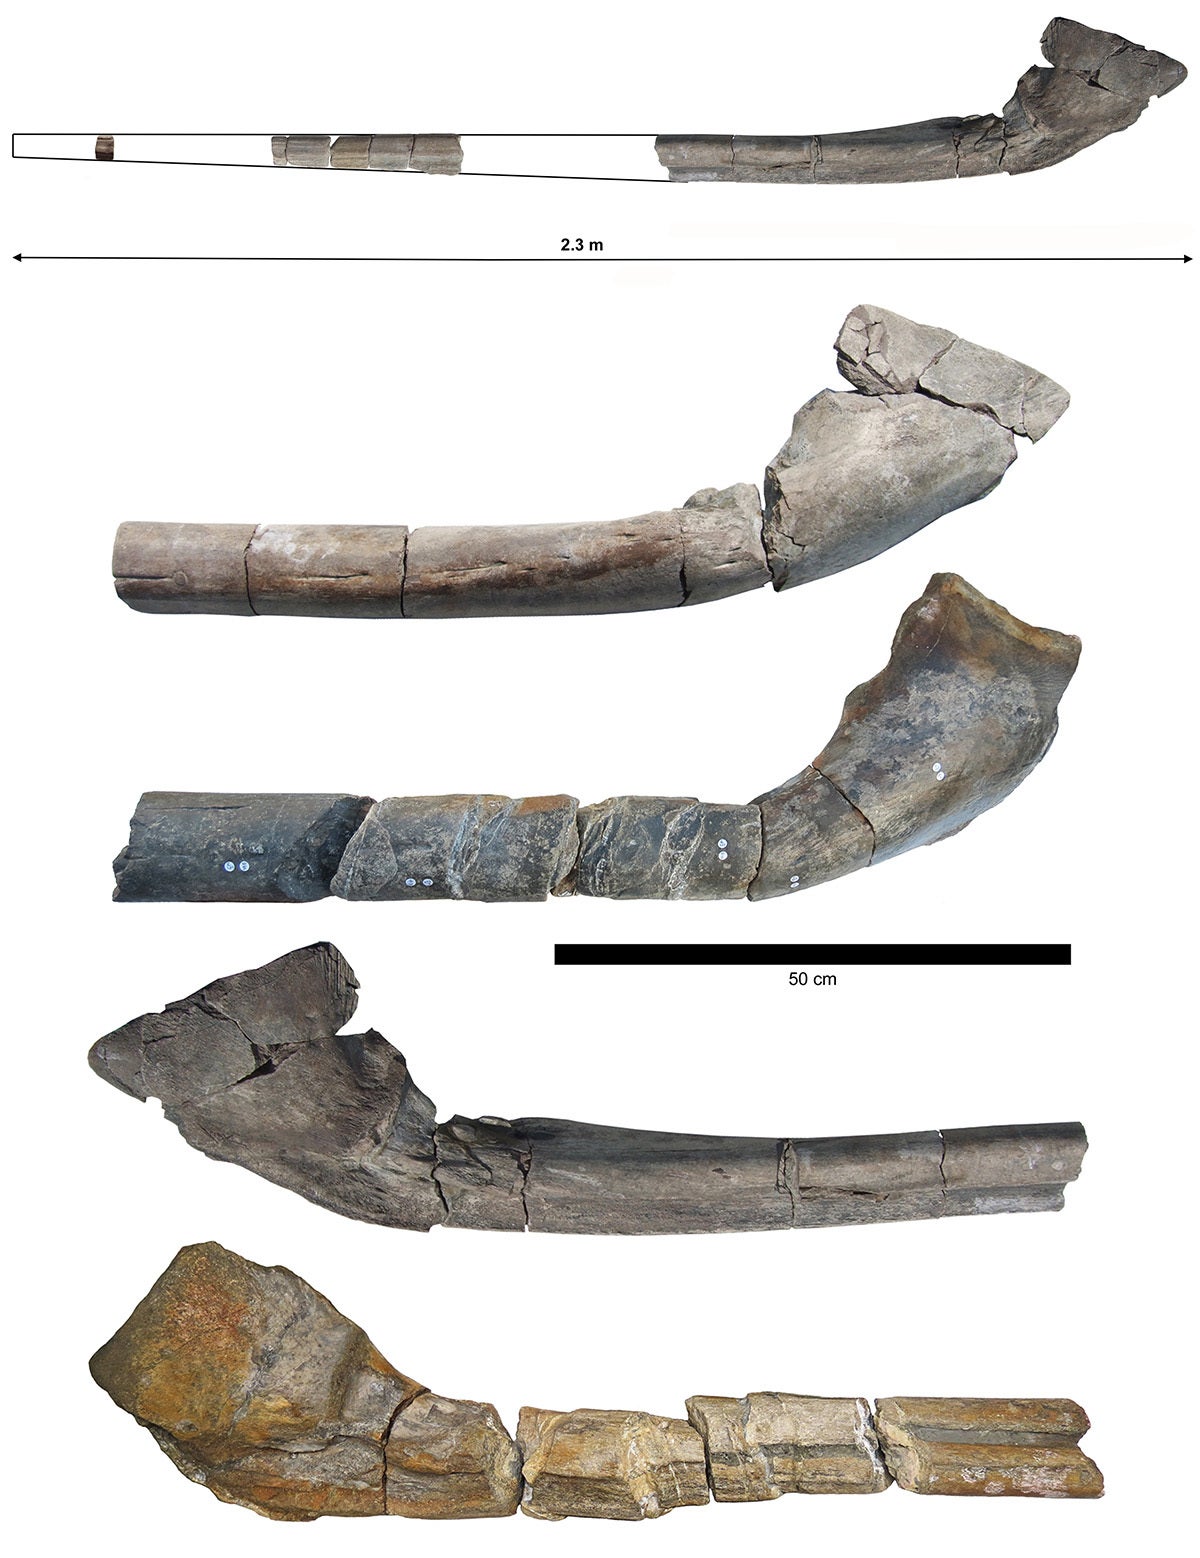 The nearly complete giant jawbone, along with a comparison with the 2018 bone (middle and bottom) found by Paul de la Salle. 